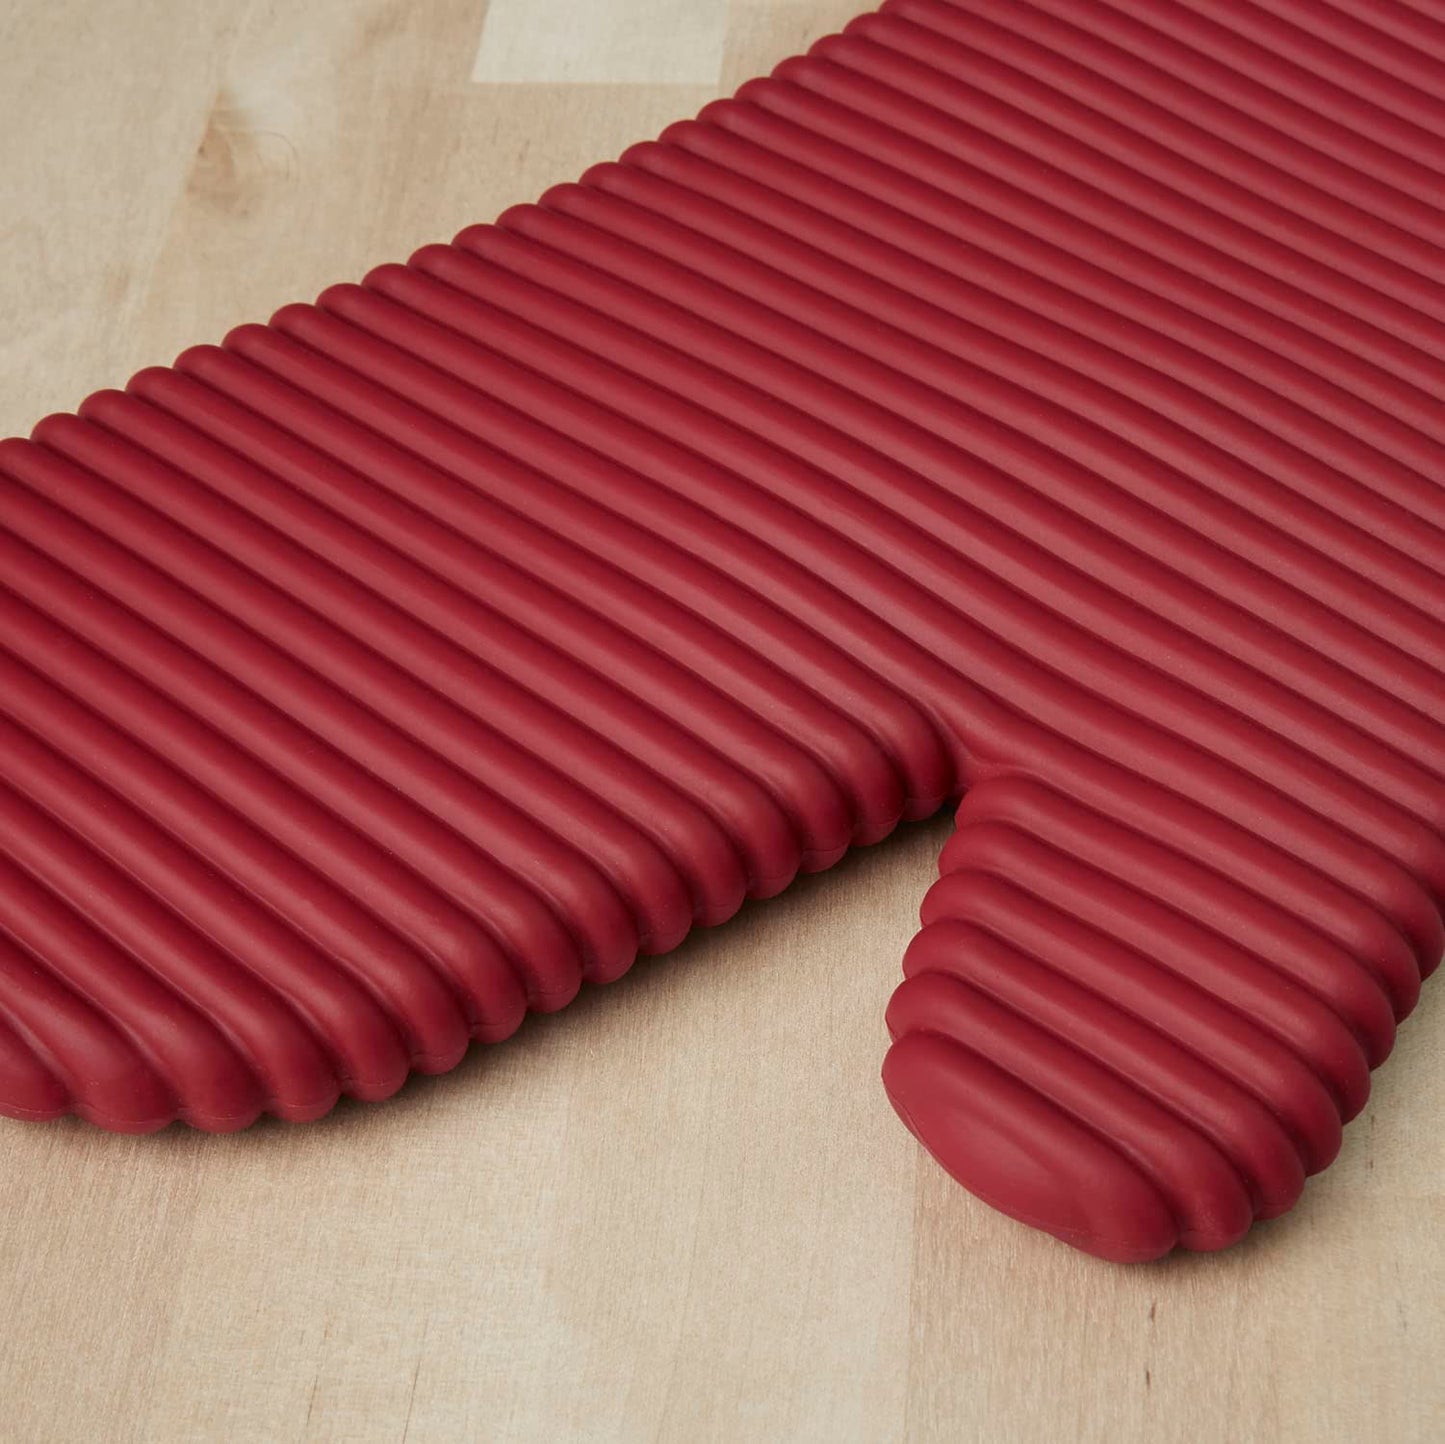 KitchenAid Ribbed Soft Silicone Oven Mitt Set, 7.5"x13", Passion Red 2 Count, O2013117TDKA 600